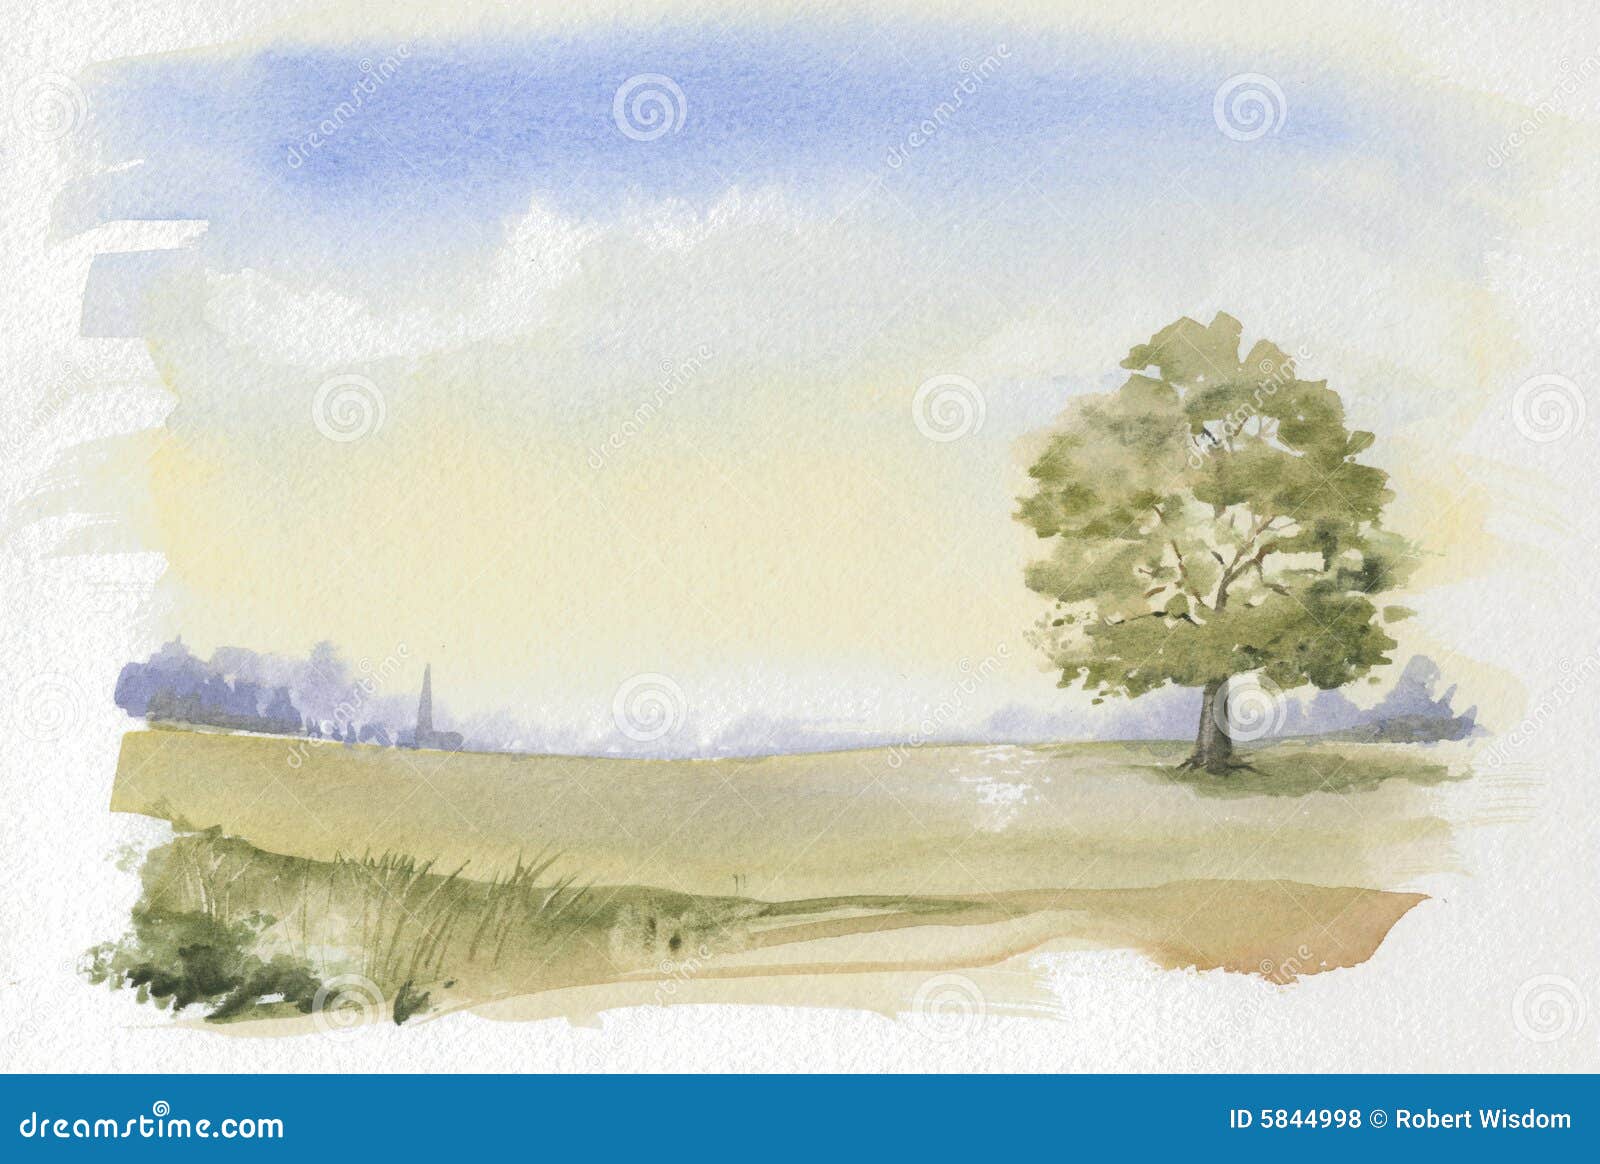 picture of typical english countryside watercolour